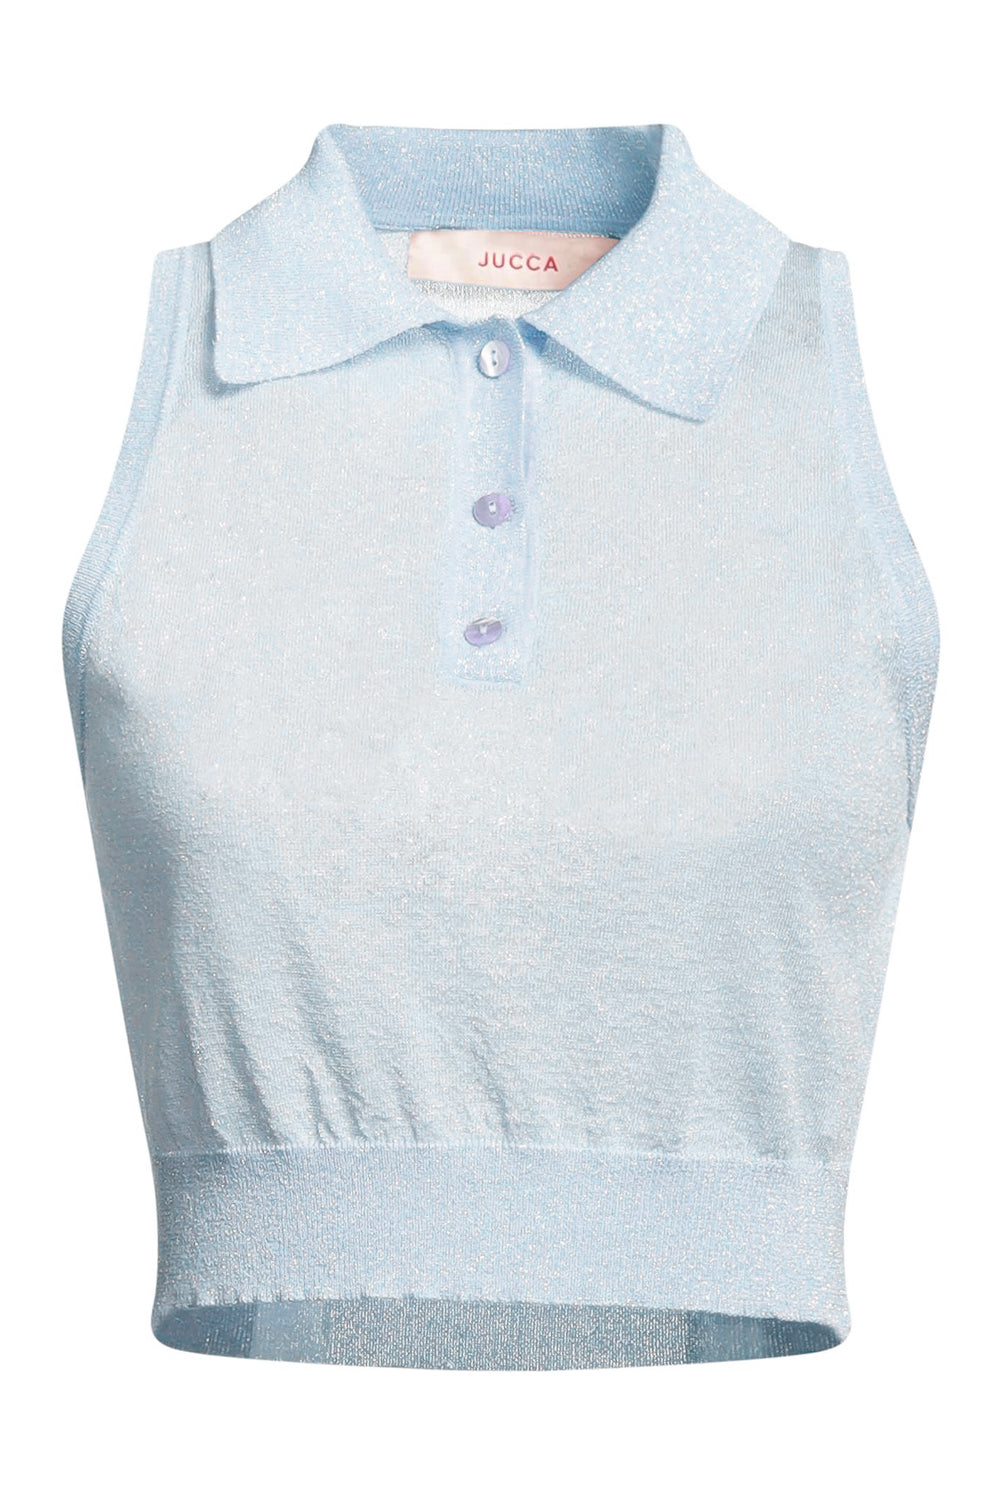 Image of JUCCA Top in maglia lurex